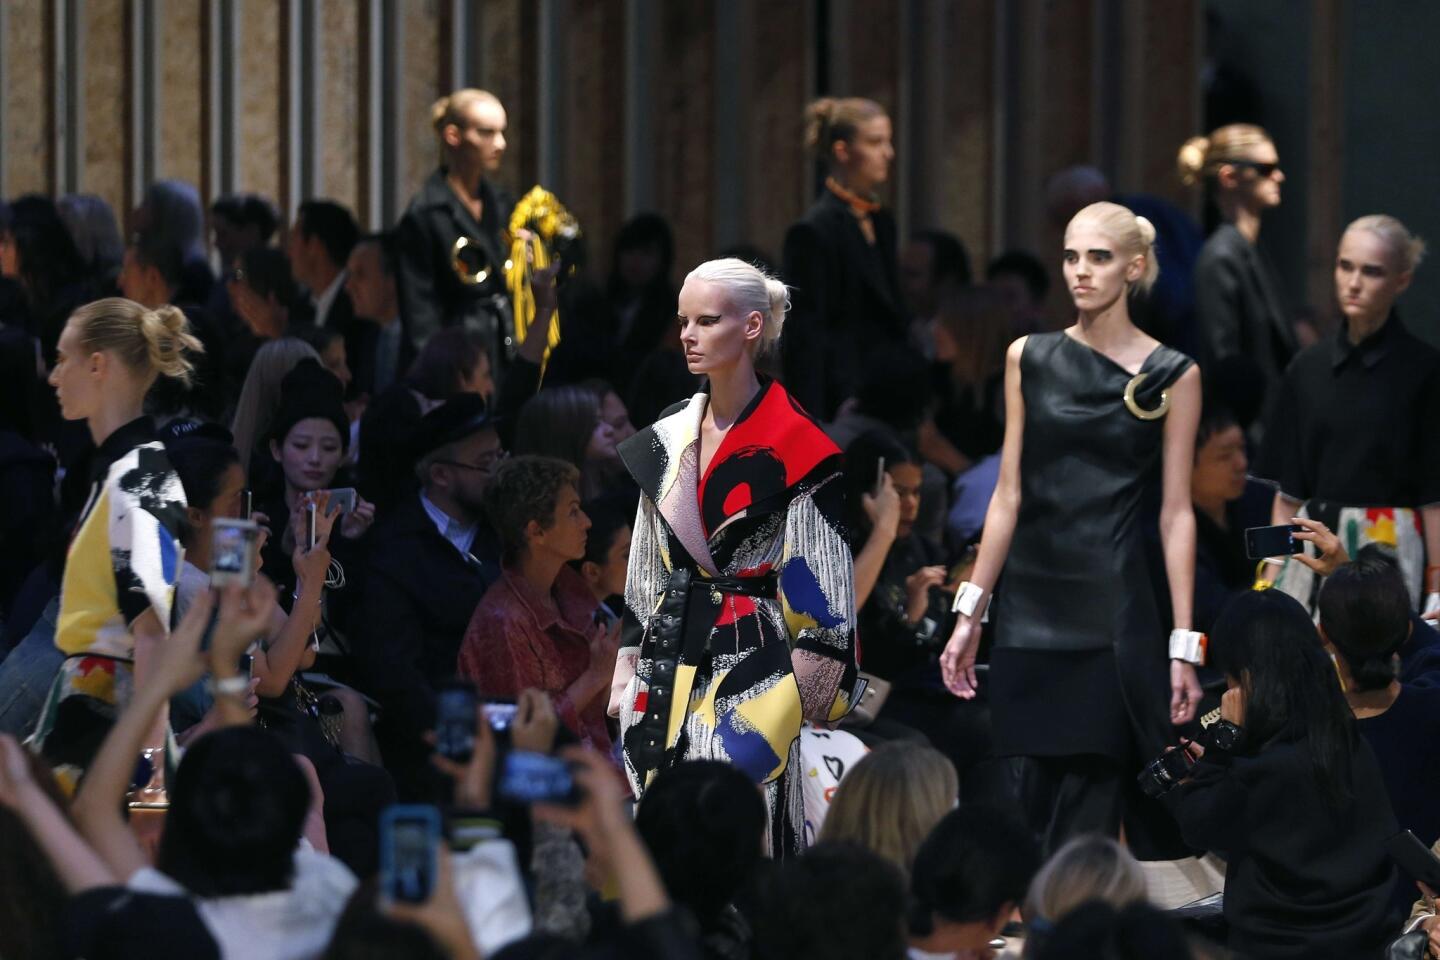 Models present pieces from Celine's spring/summer 2014 collection during Paris Fashion Week.